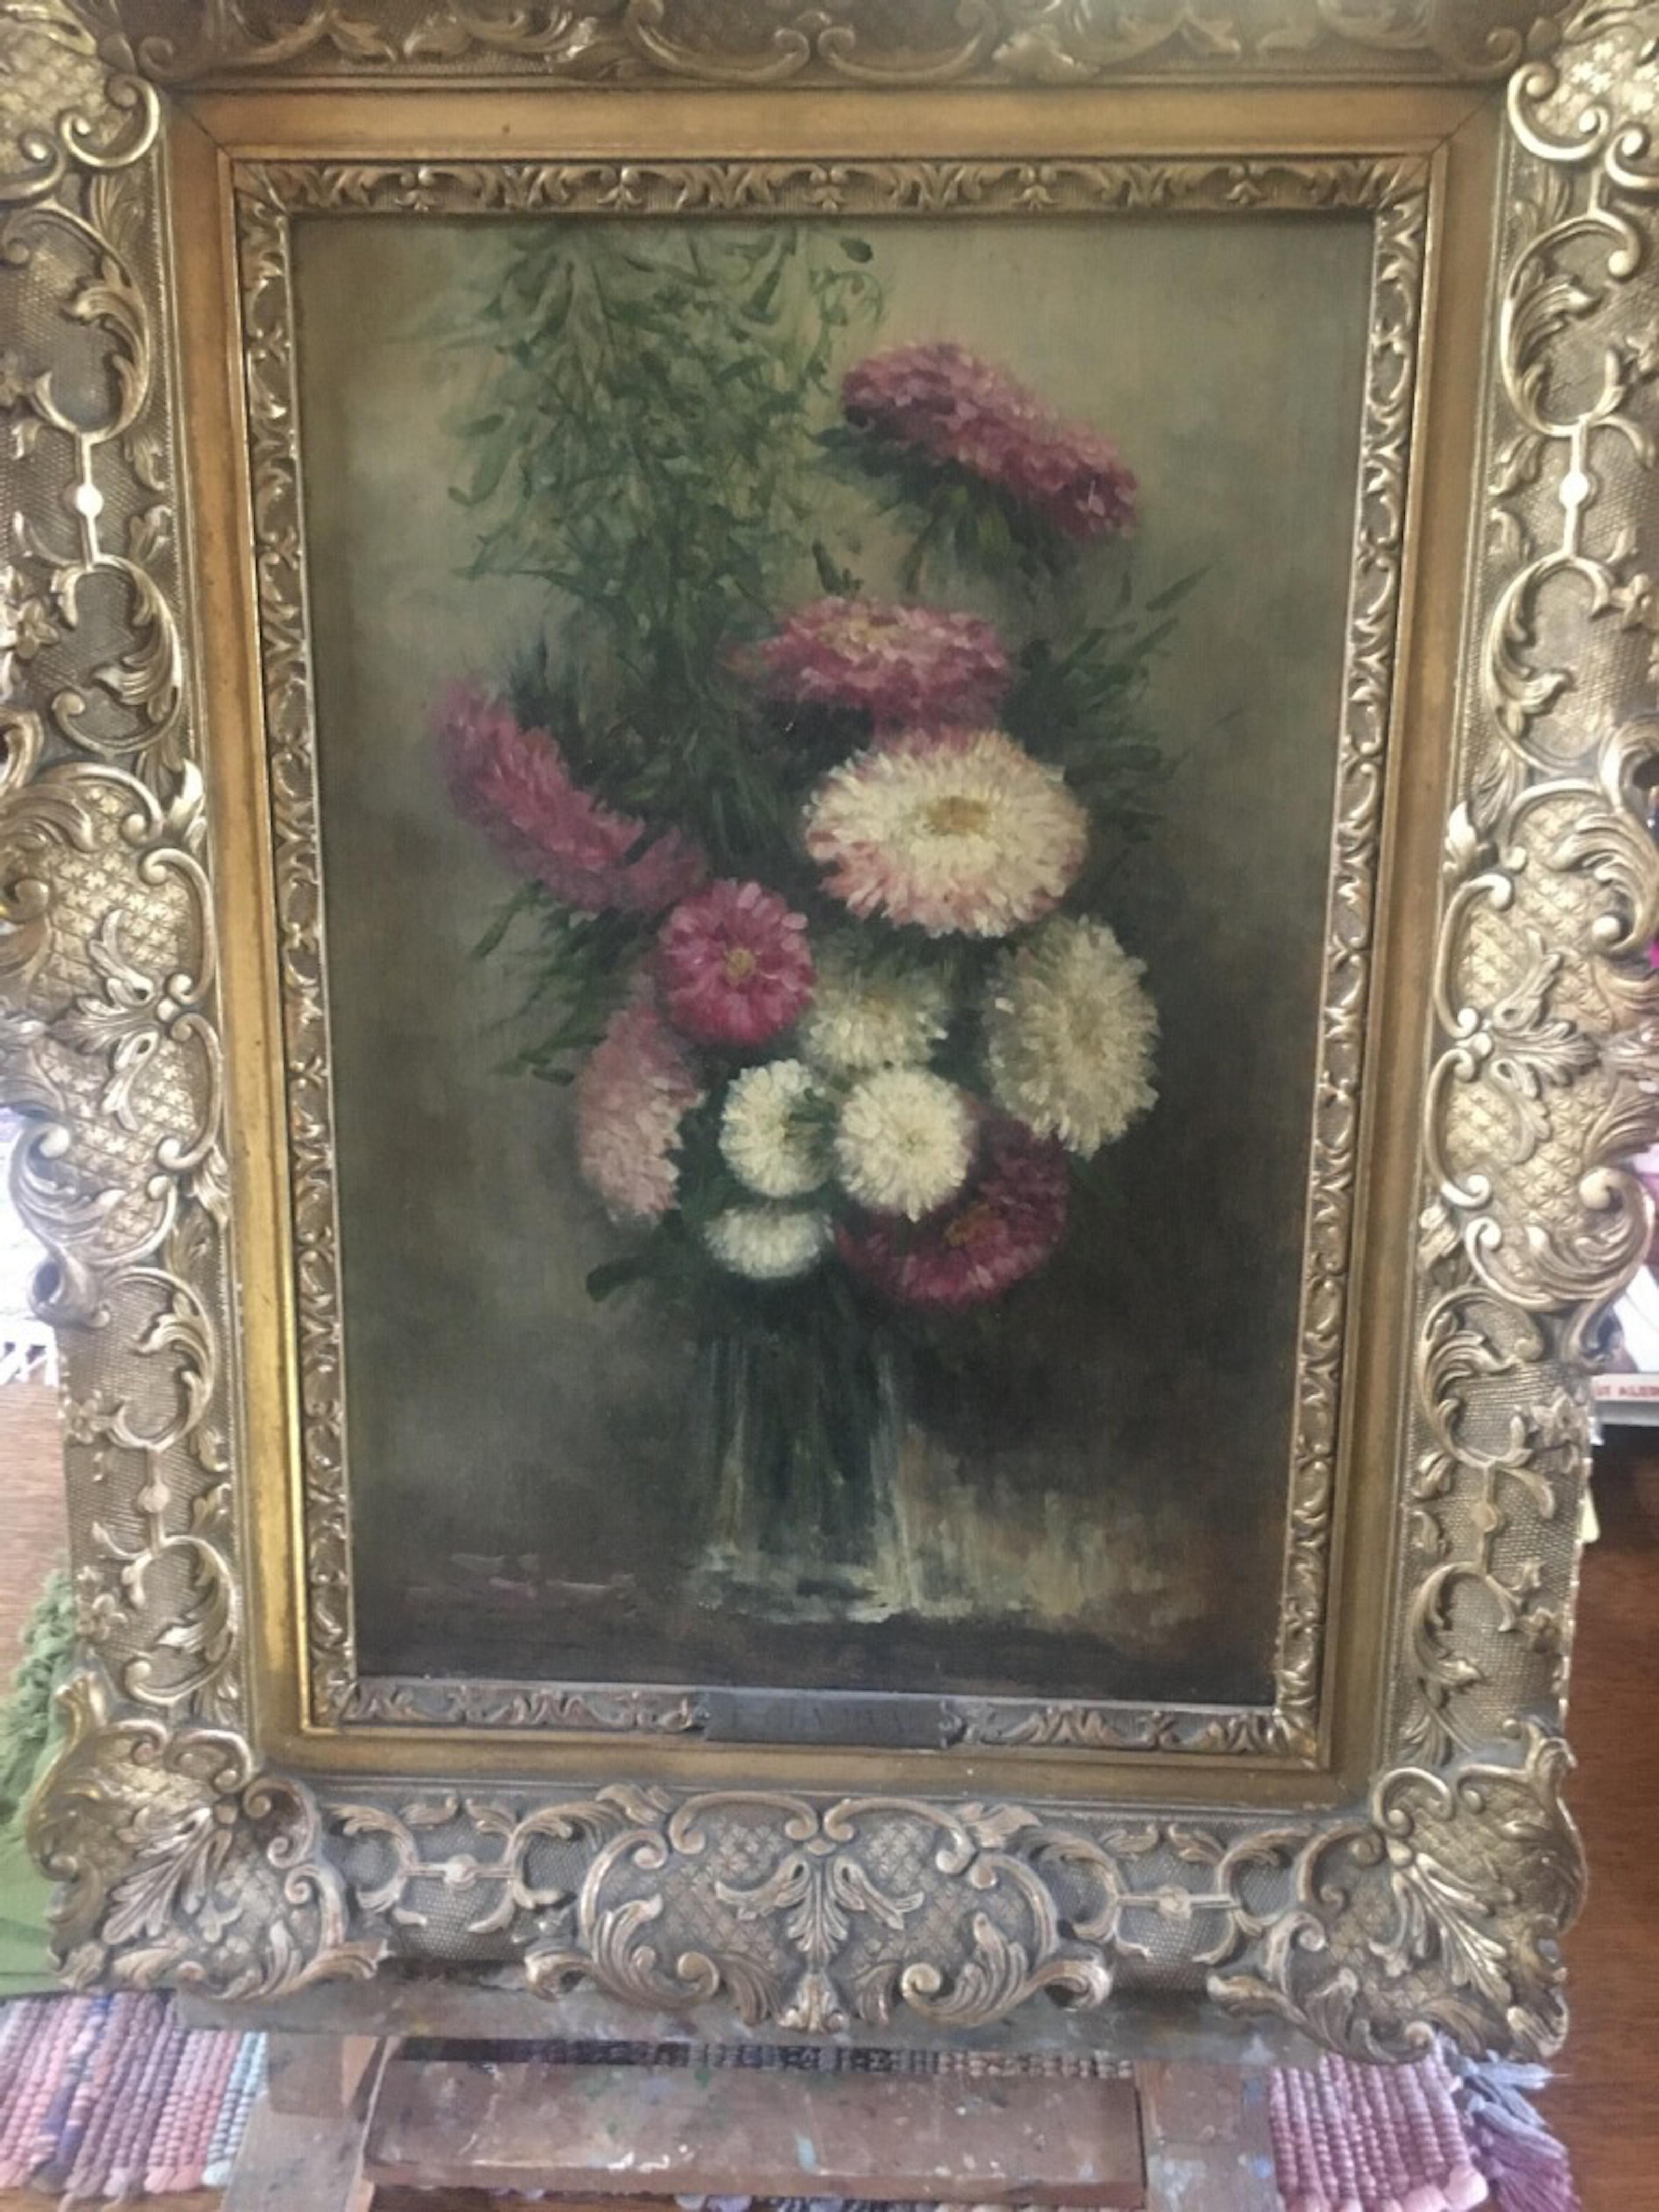 Oil on board presented in a magnificent frame, circa 1930.
Measures: 19.5